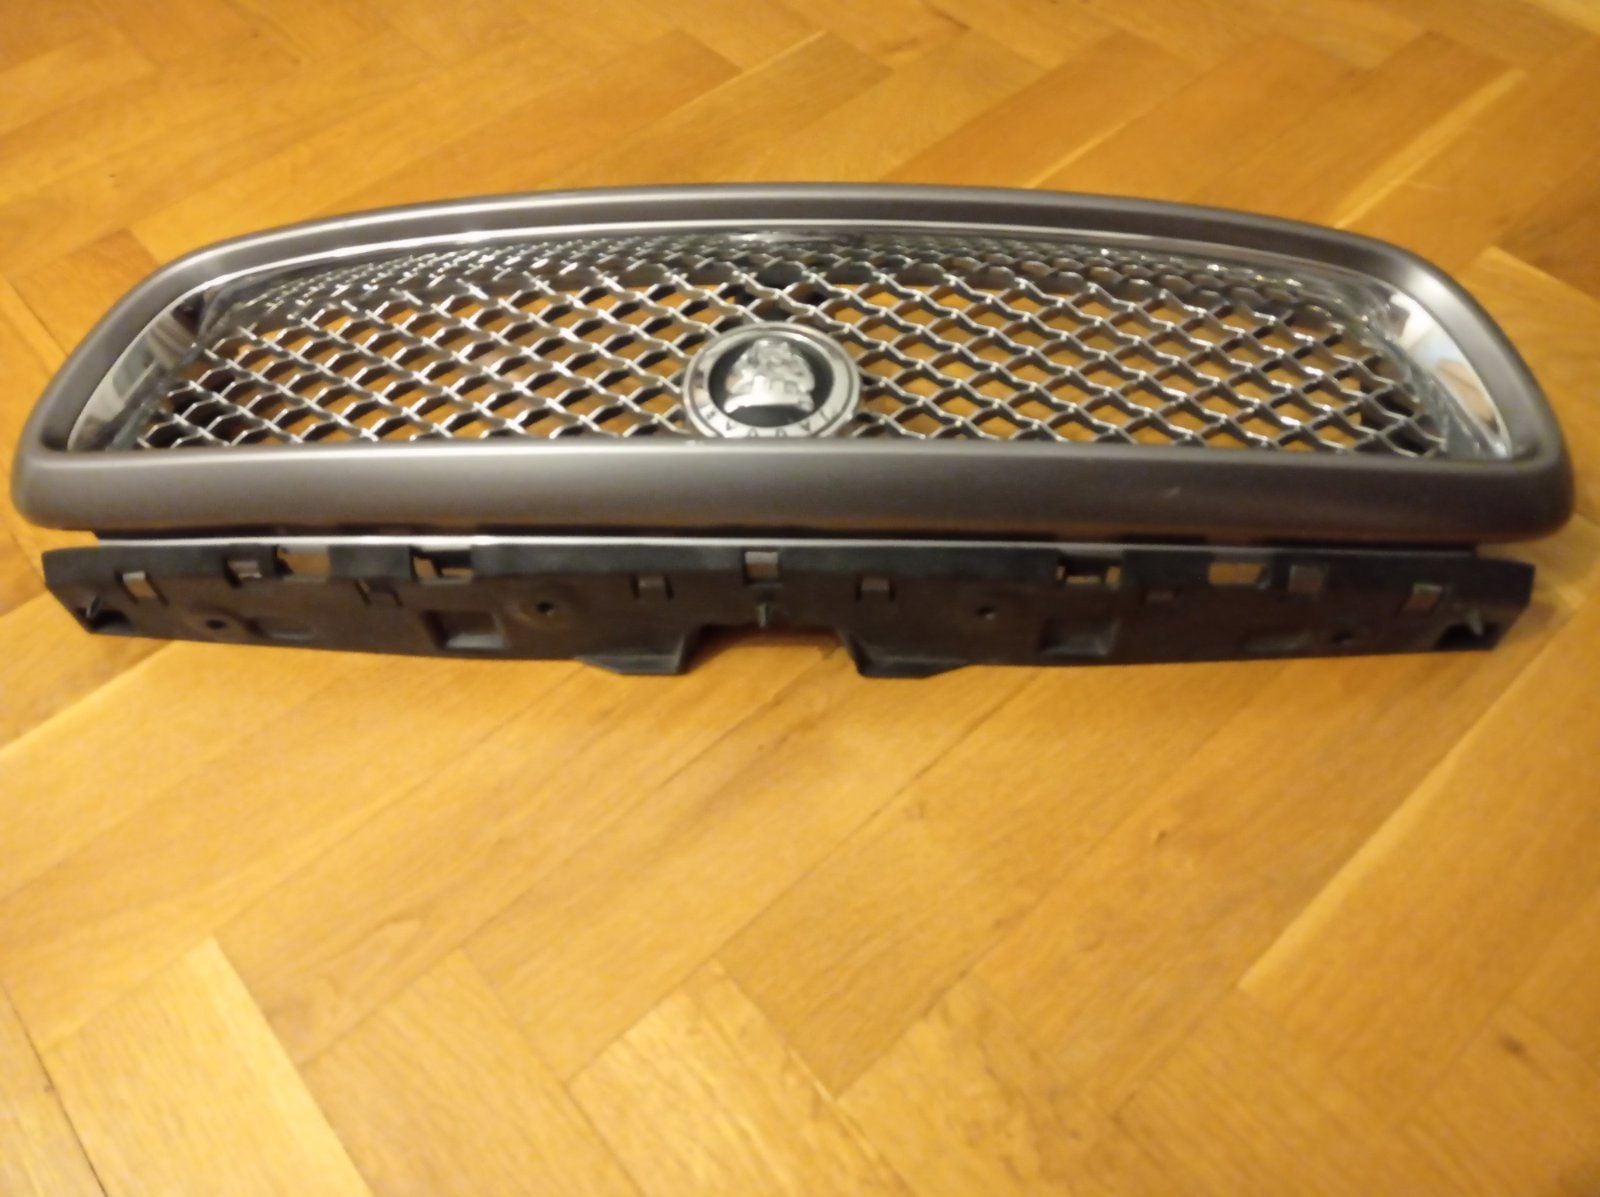 Exterior Body Parts - Jaguar X-type facelift grill - Used - 2001 to 2009 Jaguar X-Type - Bad Iburg, Germany